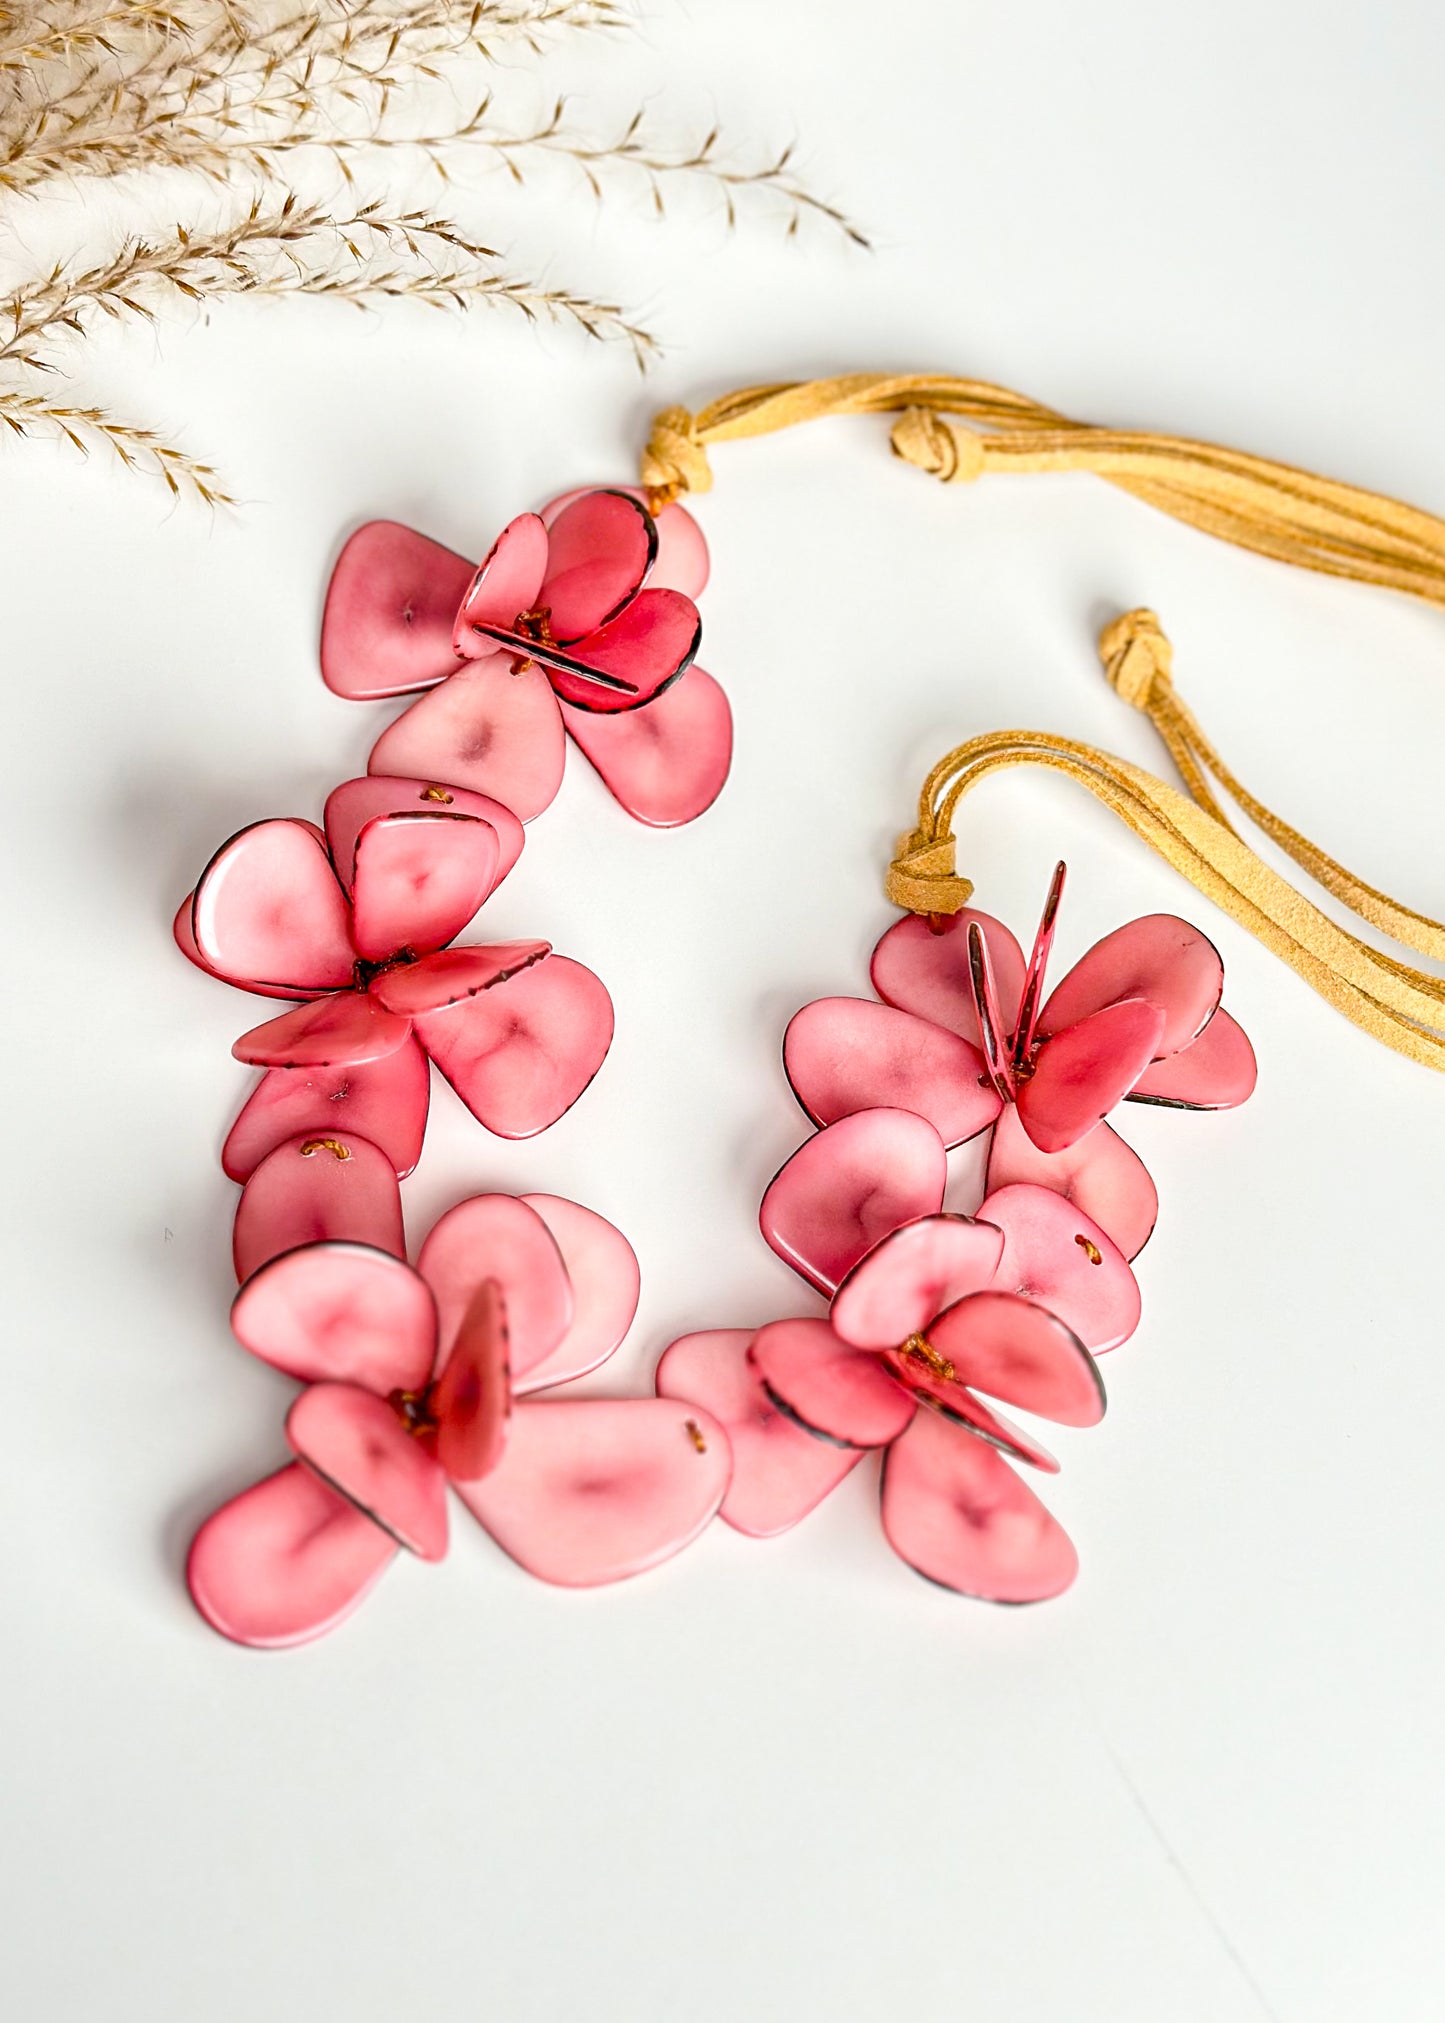 Tagua Florence Flower Necklace - Pink